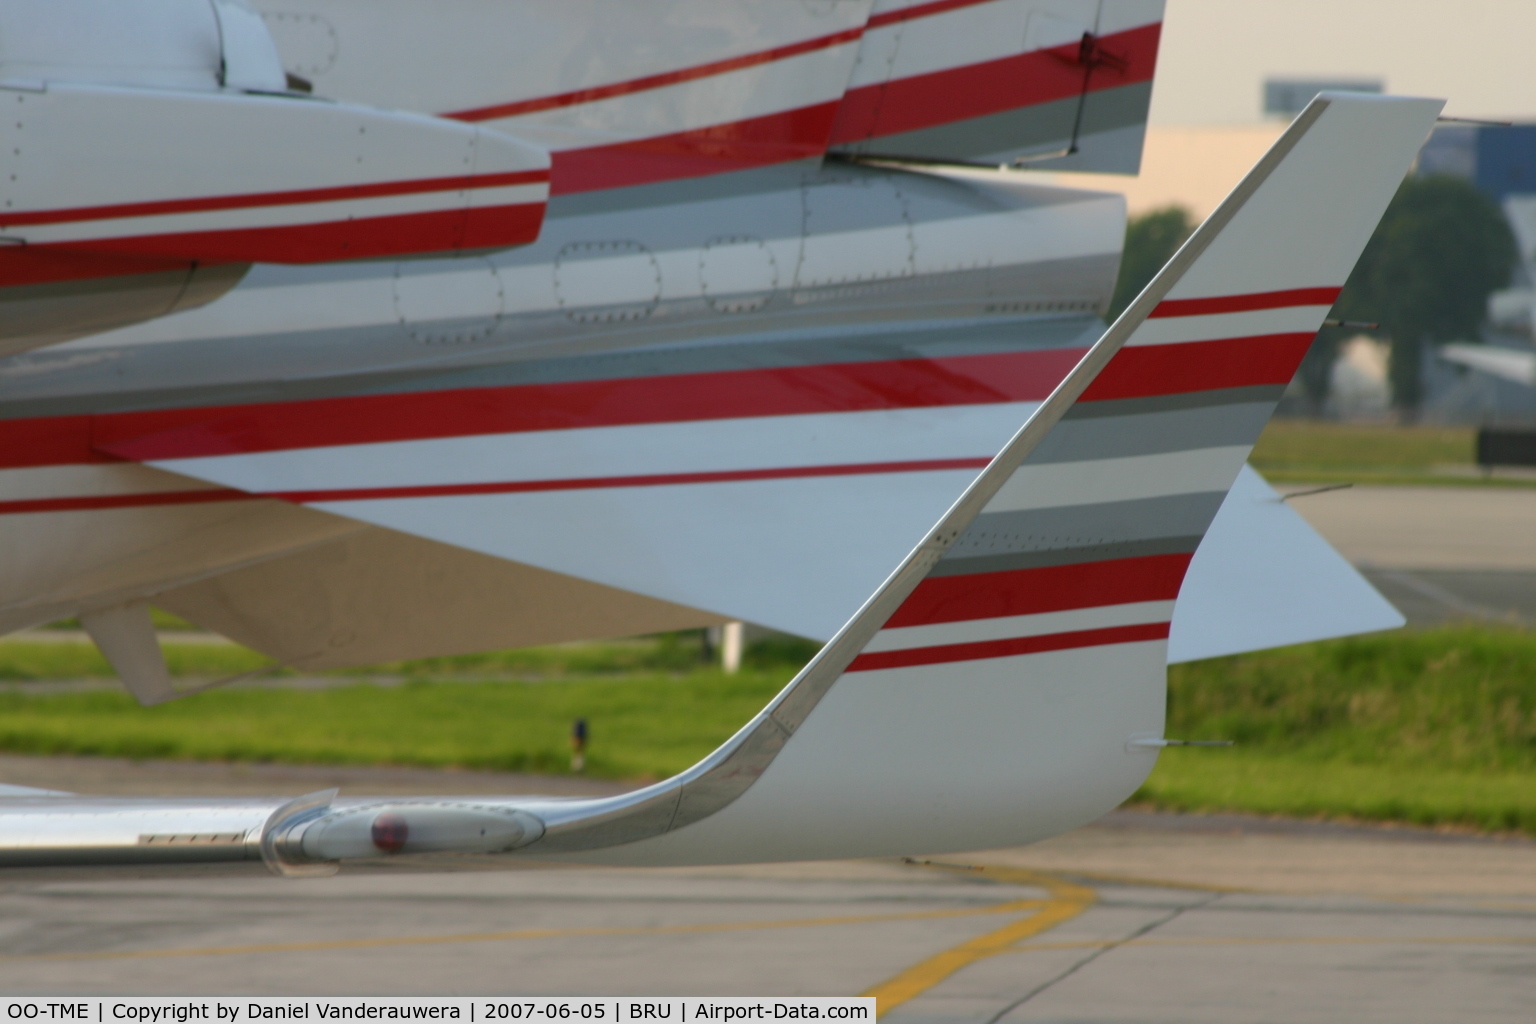 OO-TME, 2002 Learjet 60 C/N 60-255, close-up of the left winglet